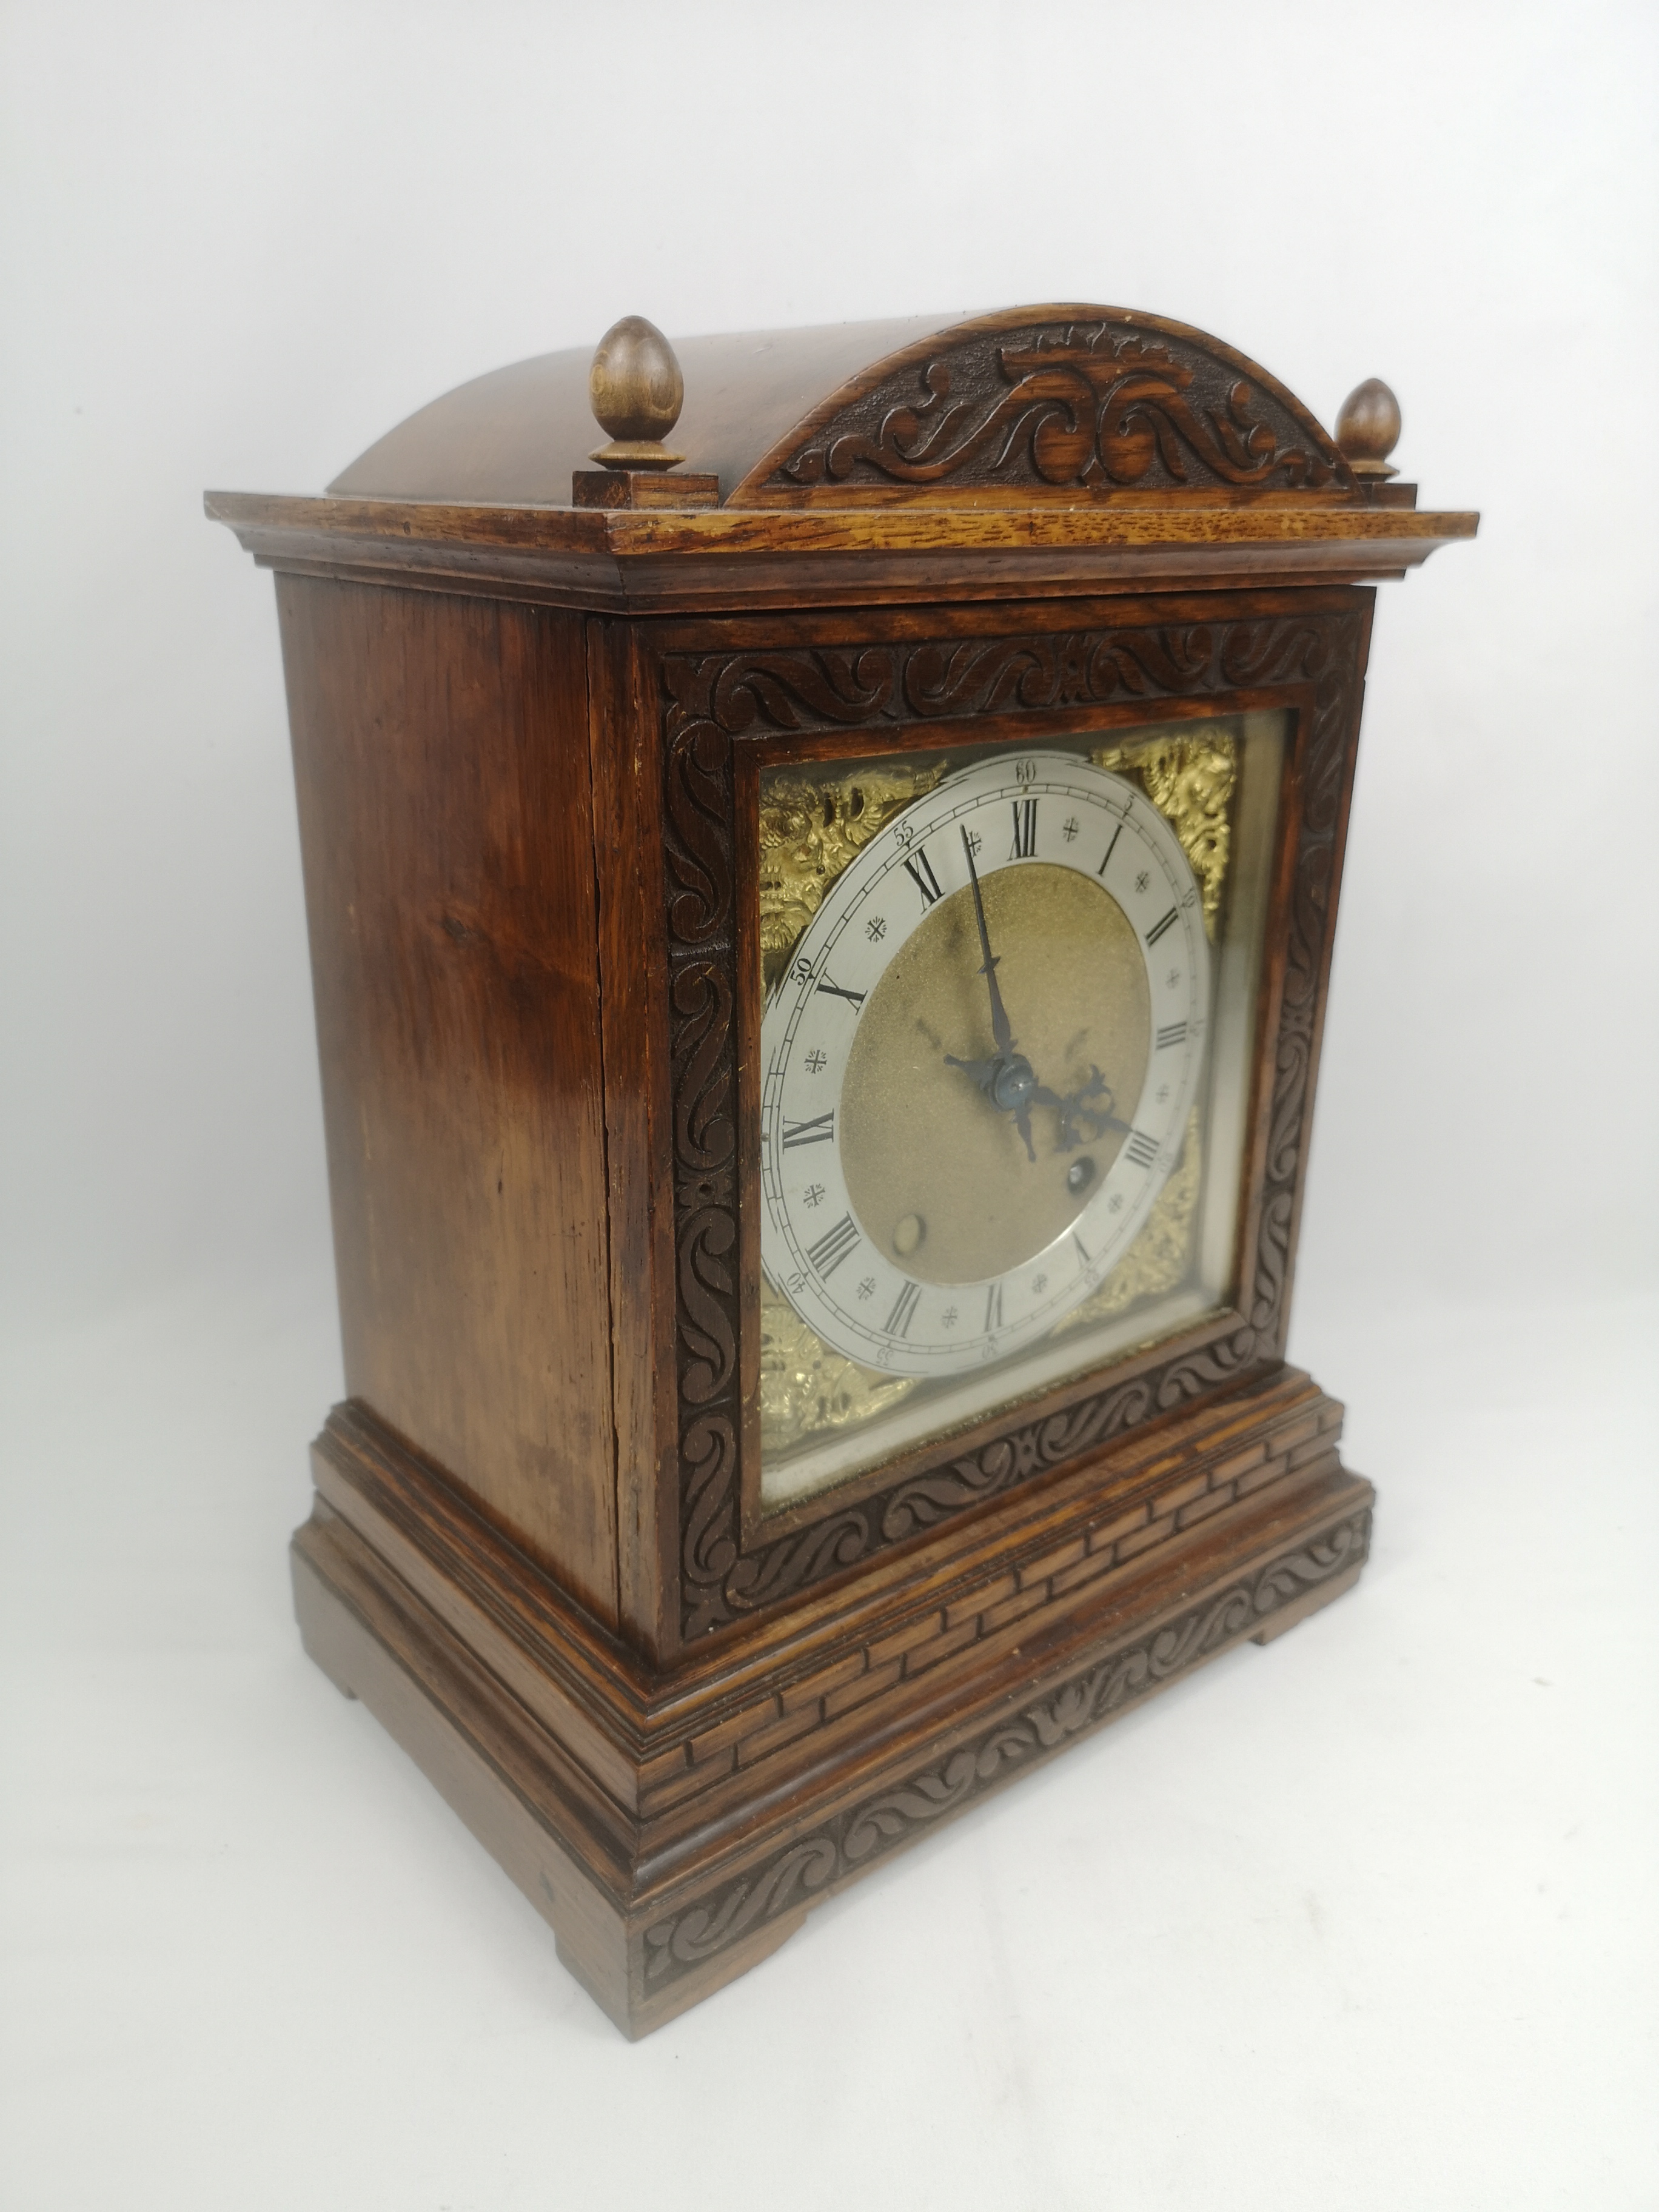 Oak cased mantel clock with brass face - Image 6 of 6